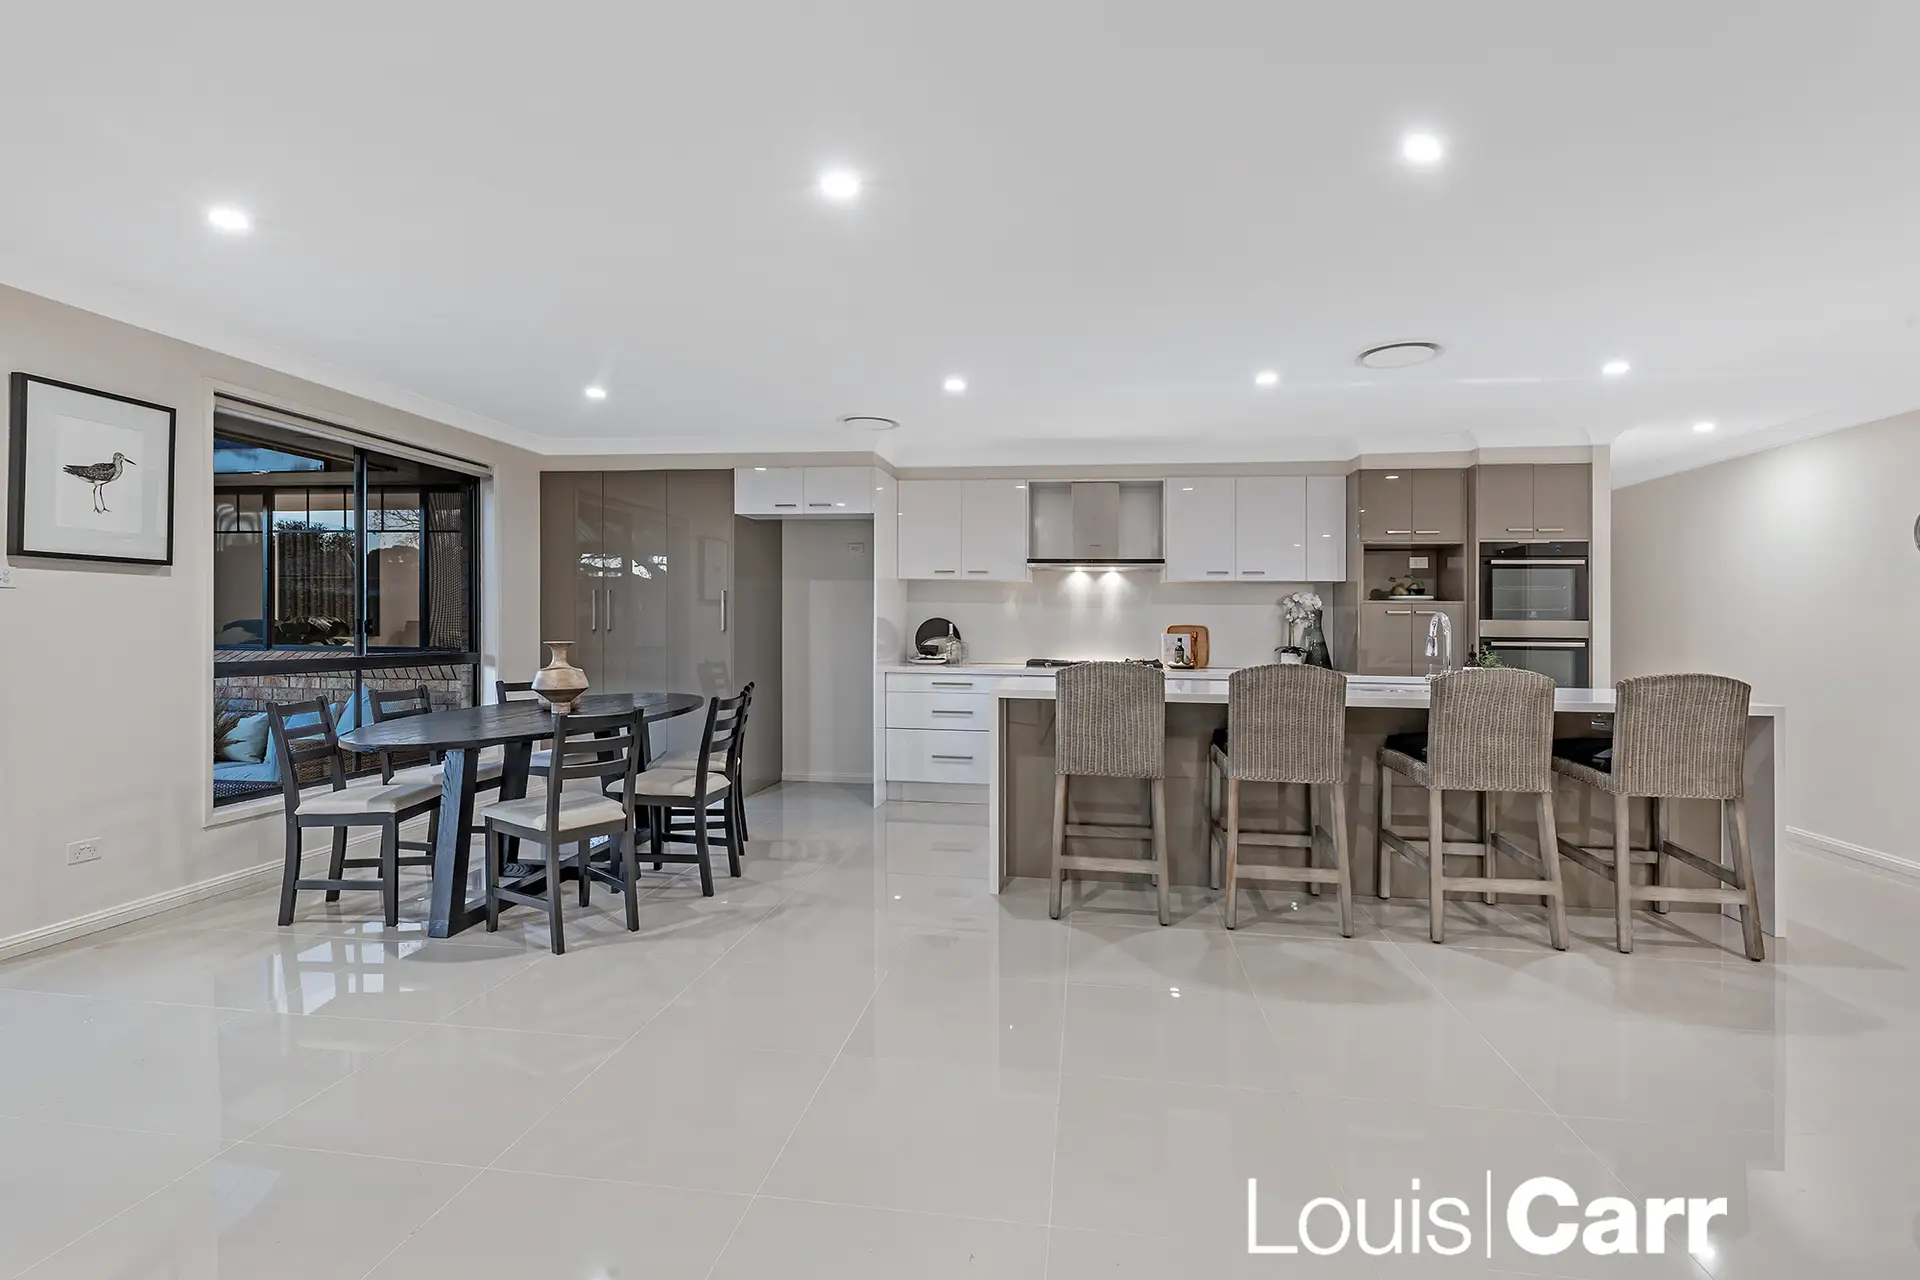 Photo #6: 62 Adelphi Street, Rouse Hill - Sold by Louis Carr Real Estate